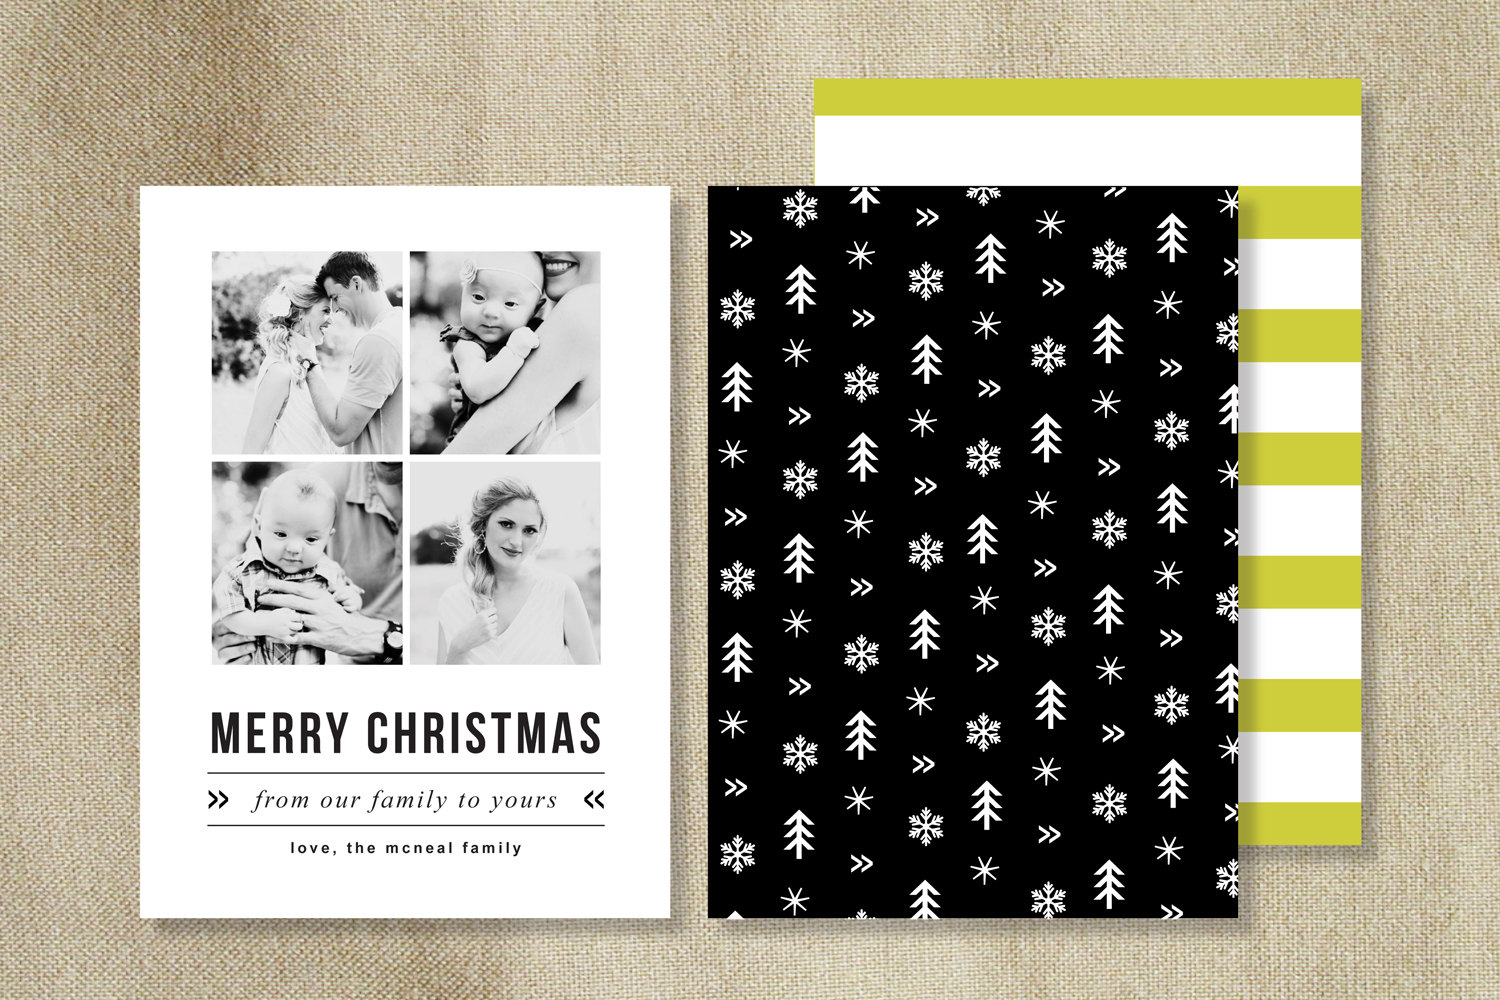 20 Christmas Card PSD Template Images - Free Psd Christmas In Free Photoshop Christmas Card Templates For Photographers